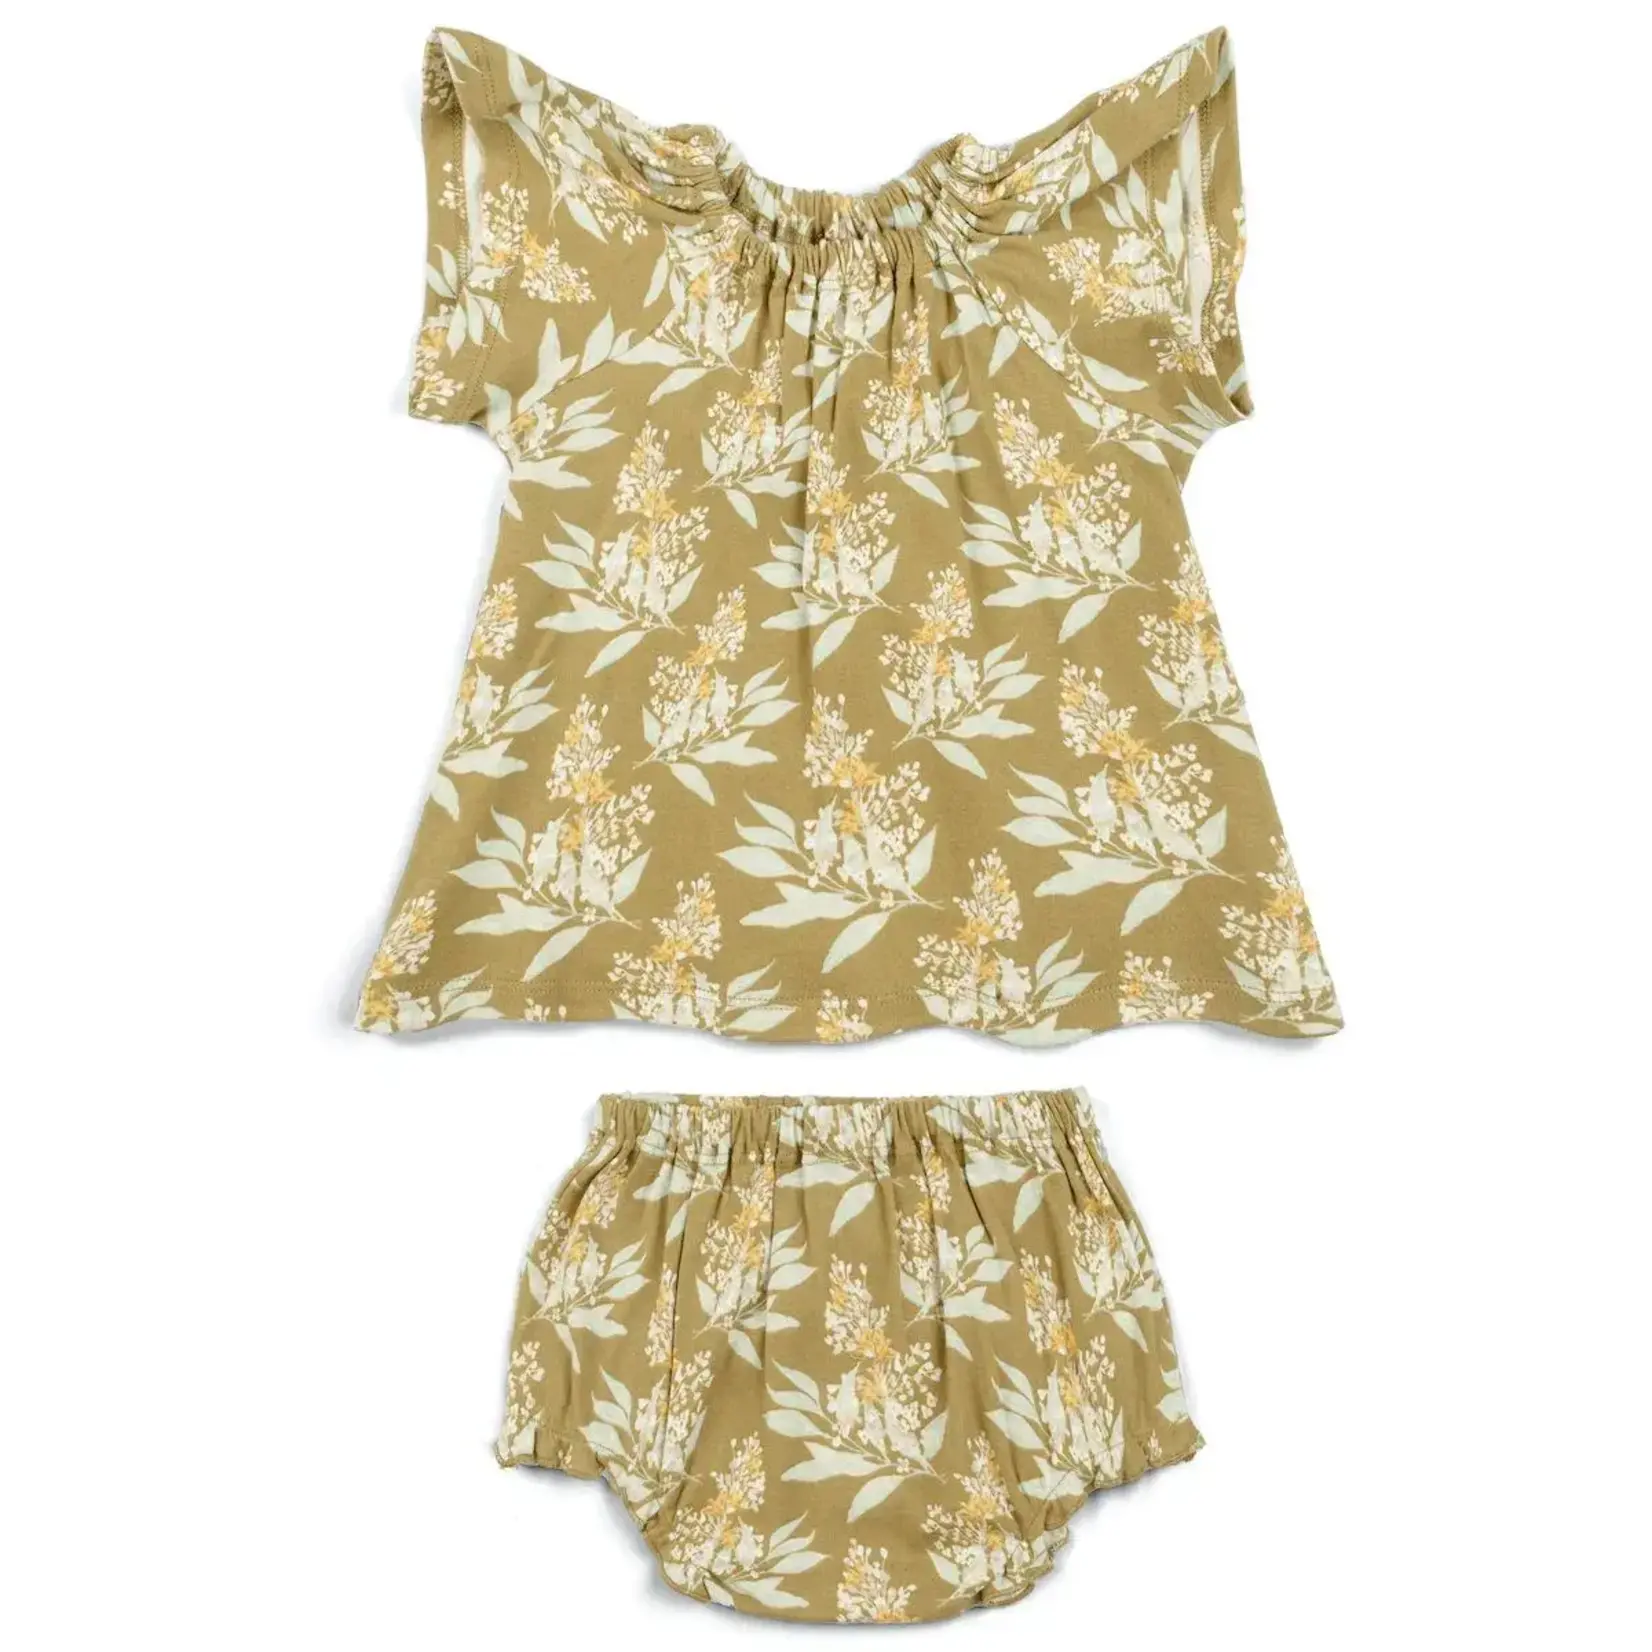 Organic Dress and Bloomer Set Water Lily